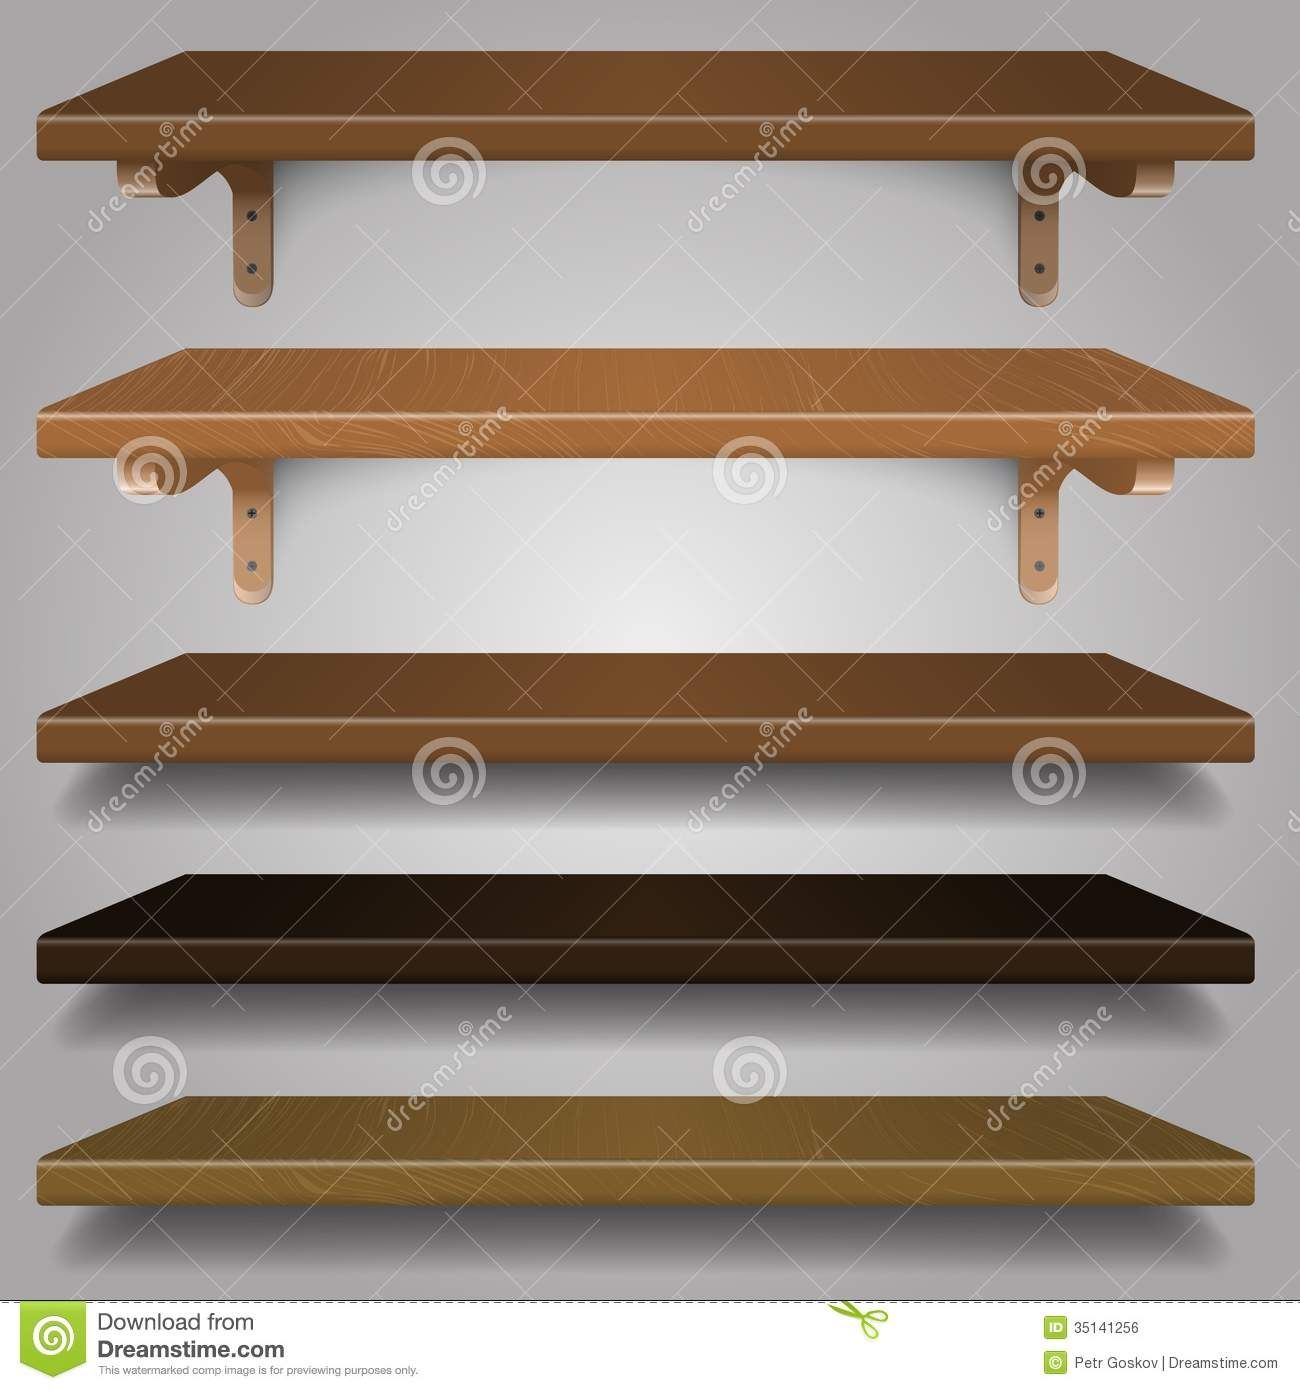 Vector Wood Shelves Royalty Free Stock Image Image 35141256 Inside Wood For Shelves (View 5 of 15)